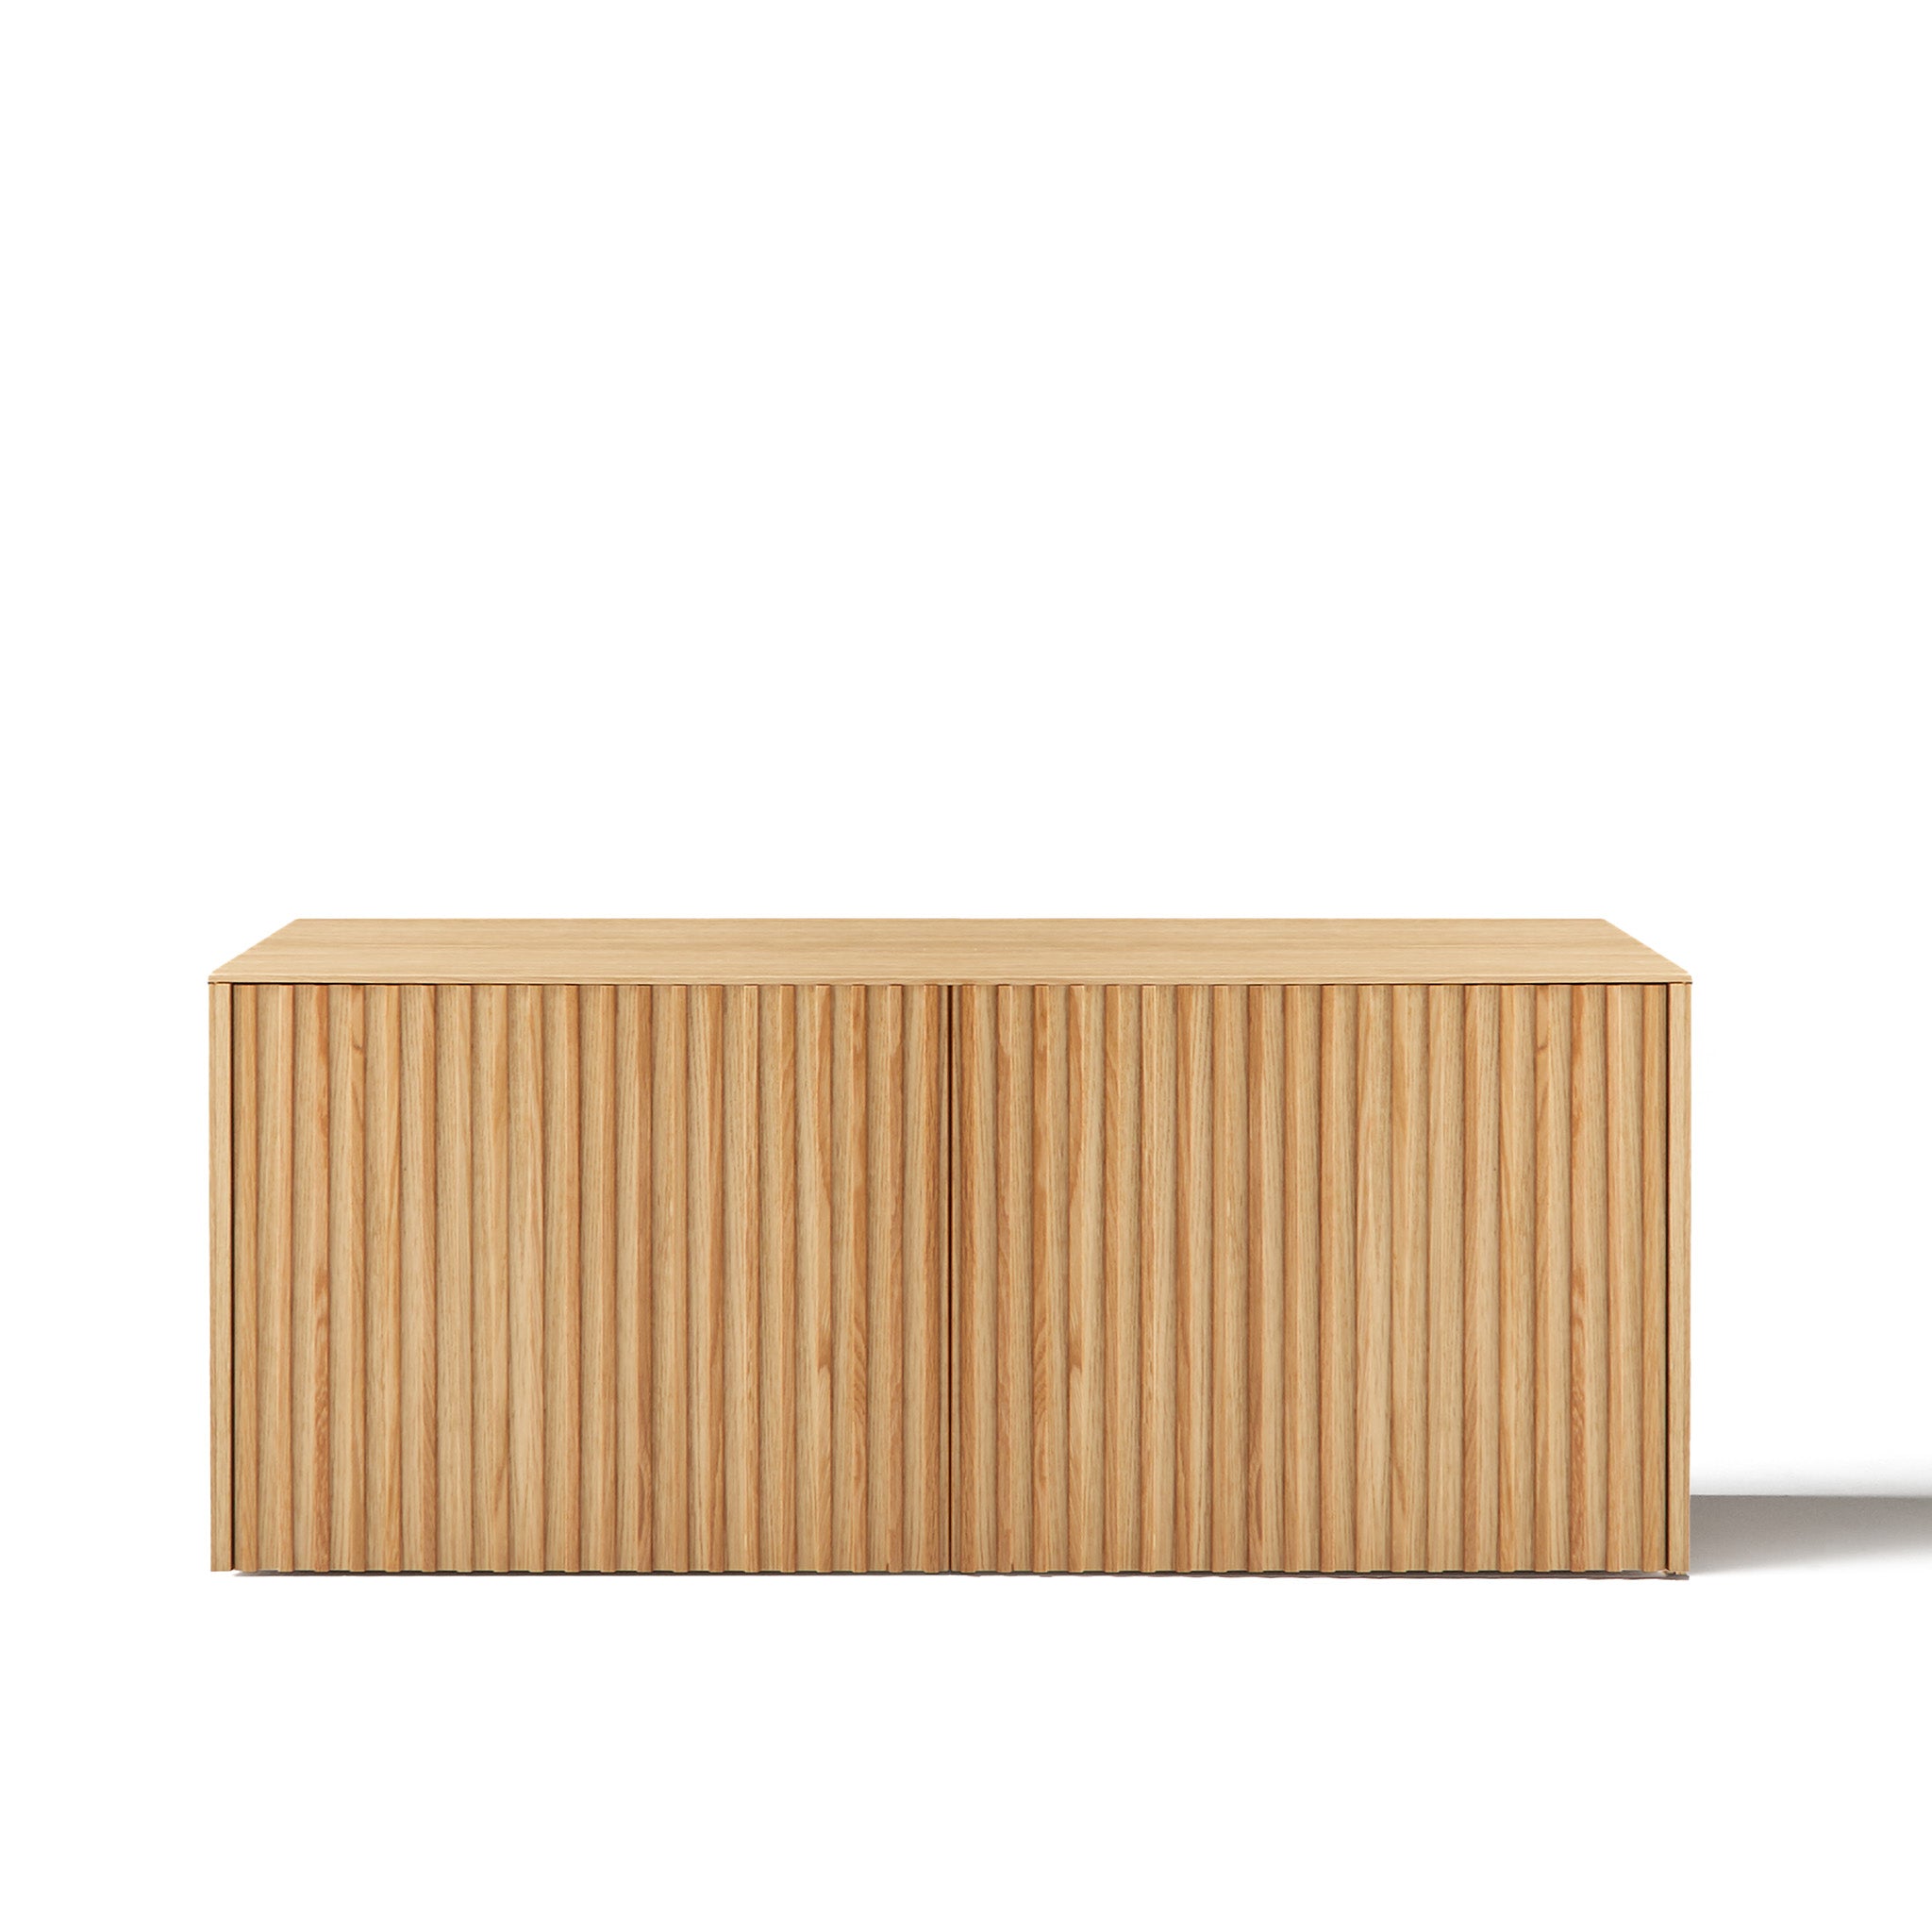 Velasca Sideboard by Ludovica & Roberto Palomba for Punt